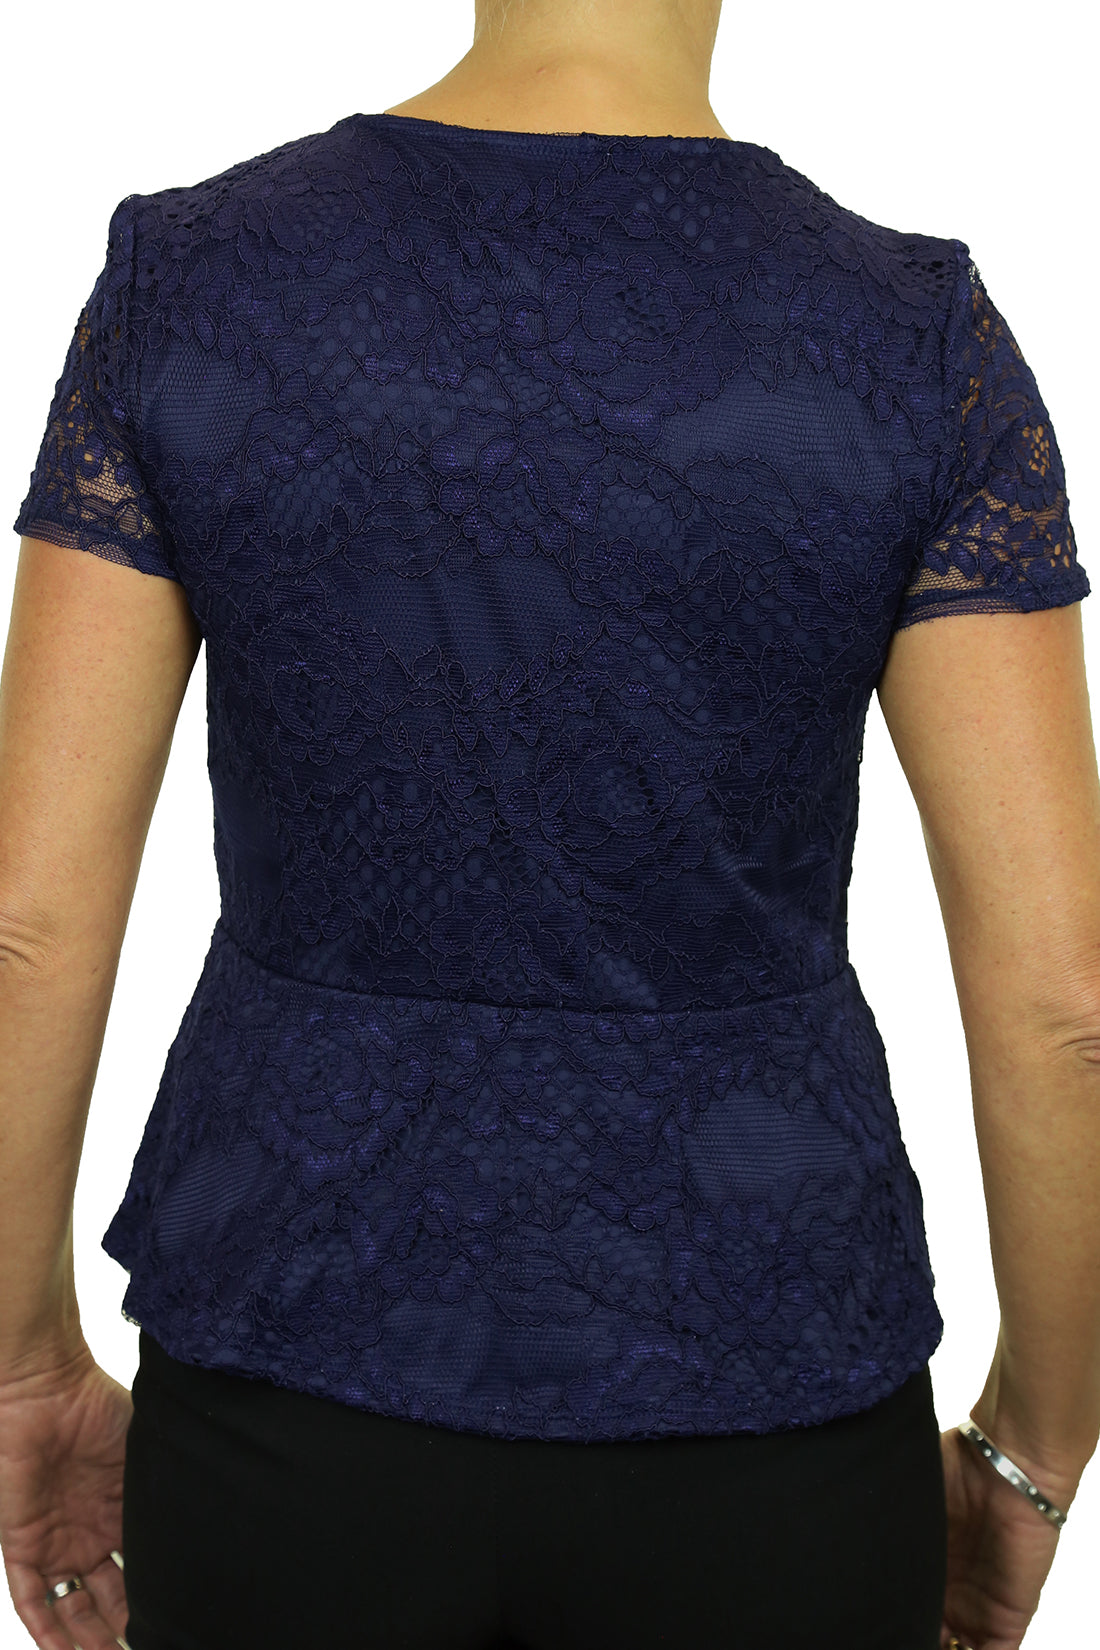 Crochet Lace Peplum Top Fully Lined Navy Blue